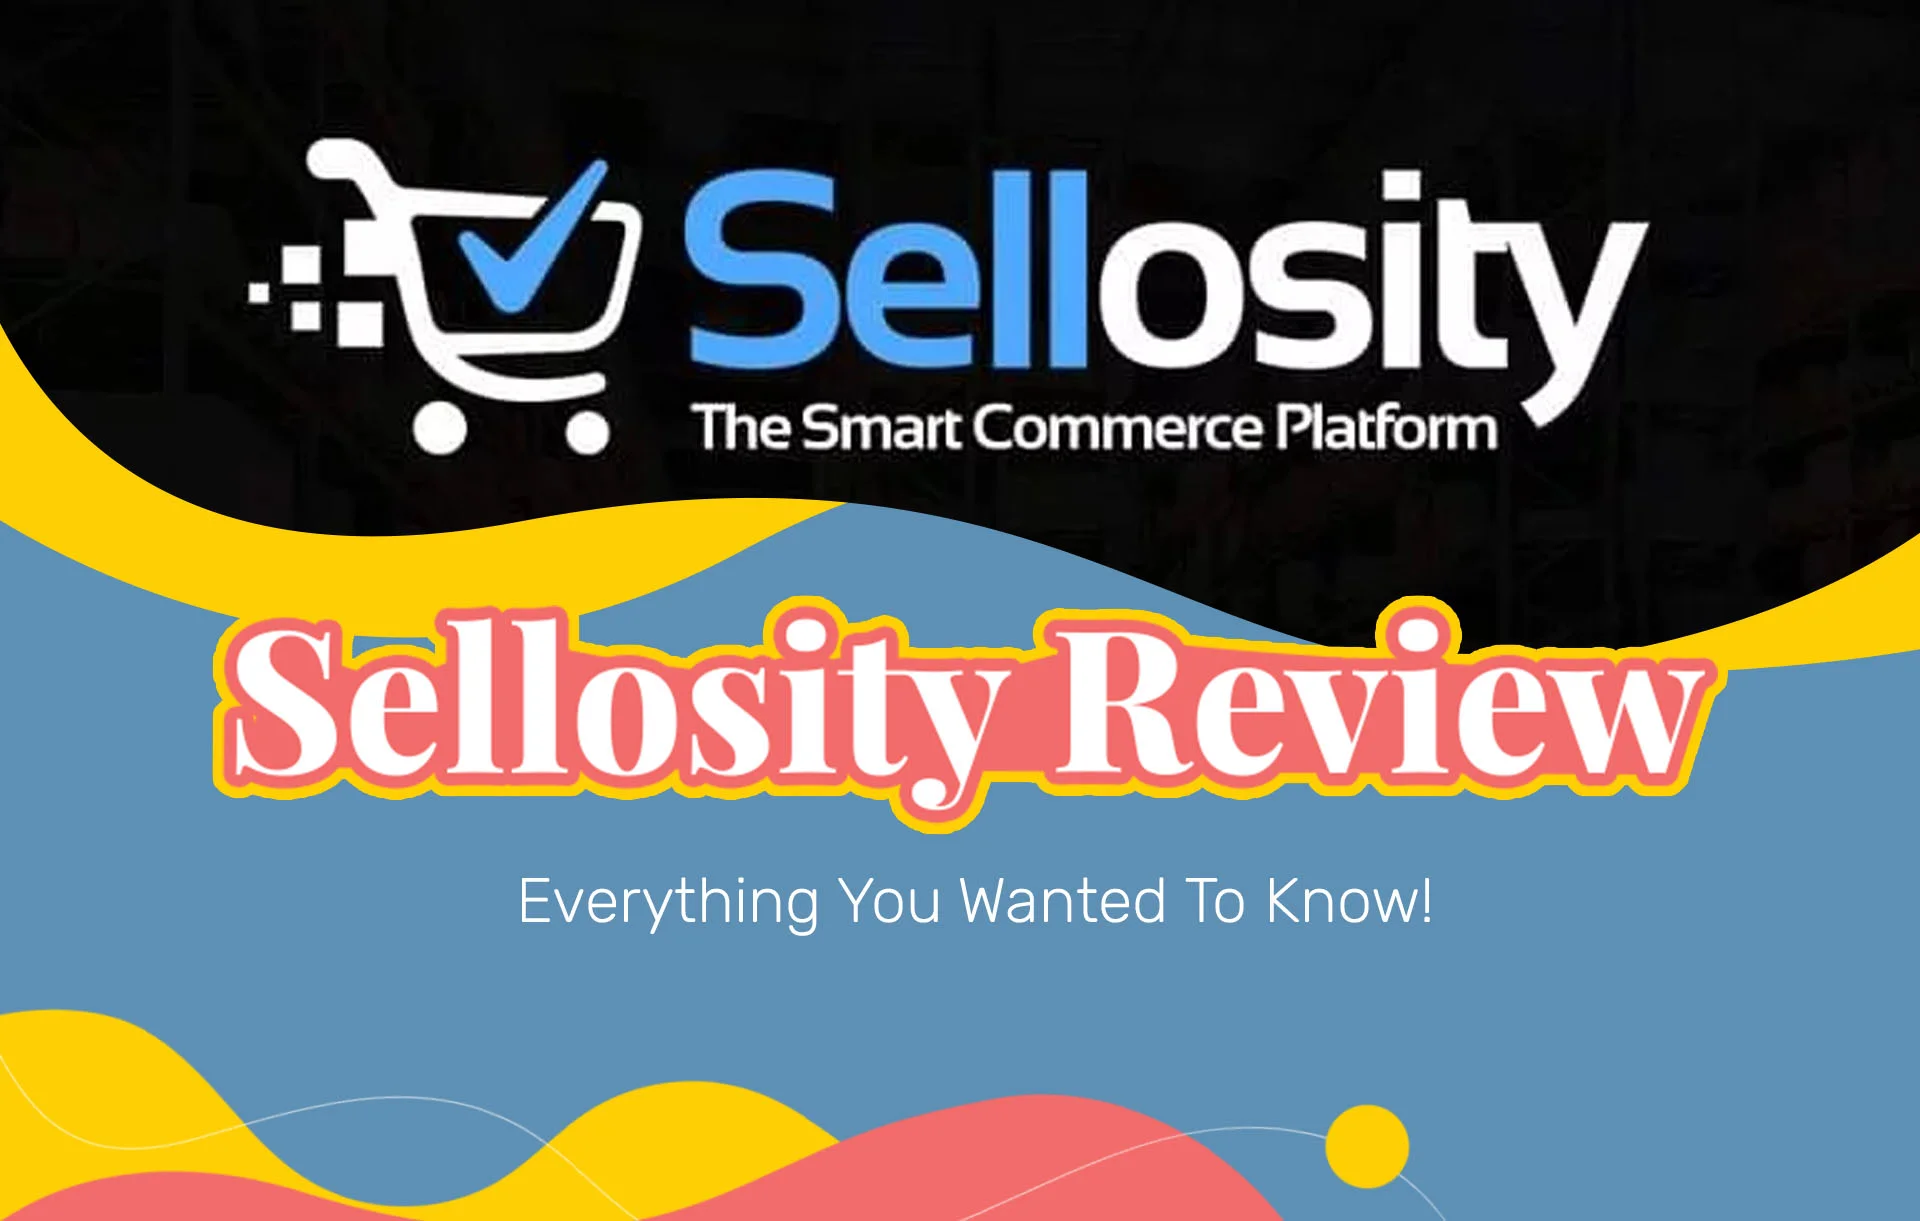 Sellosity Reviews: Everything You Wanted To Know!